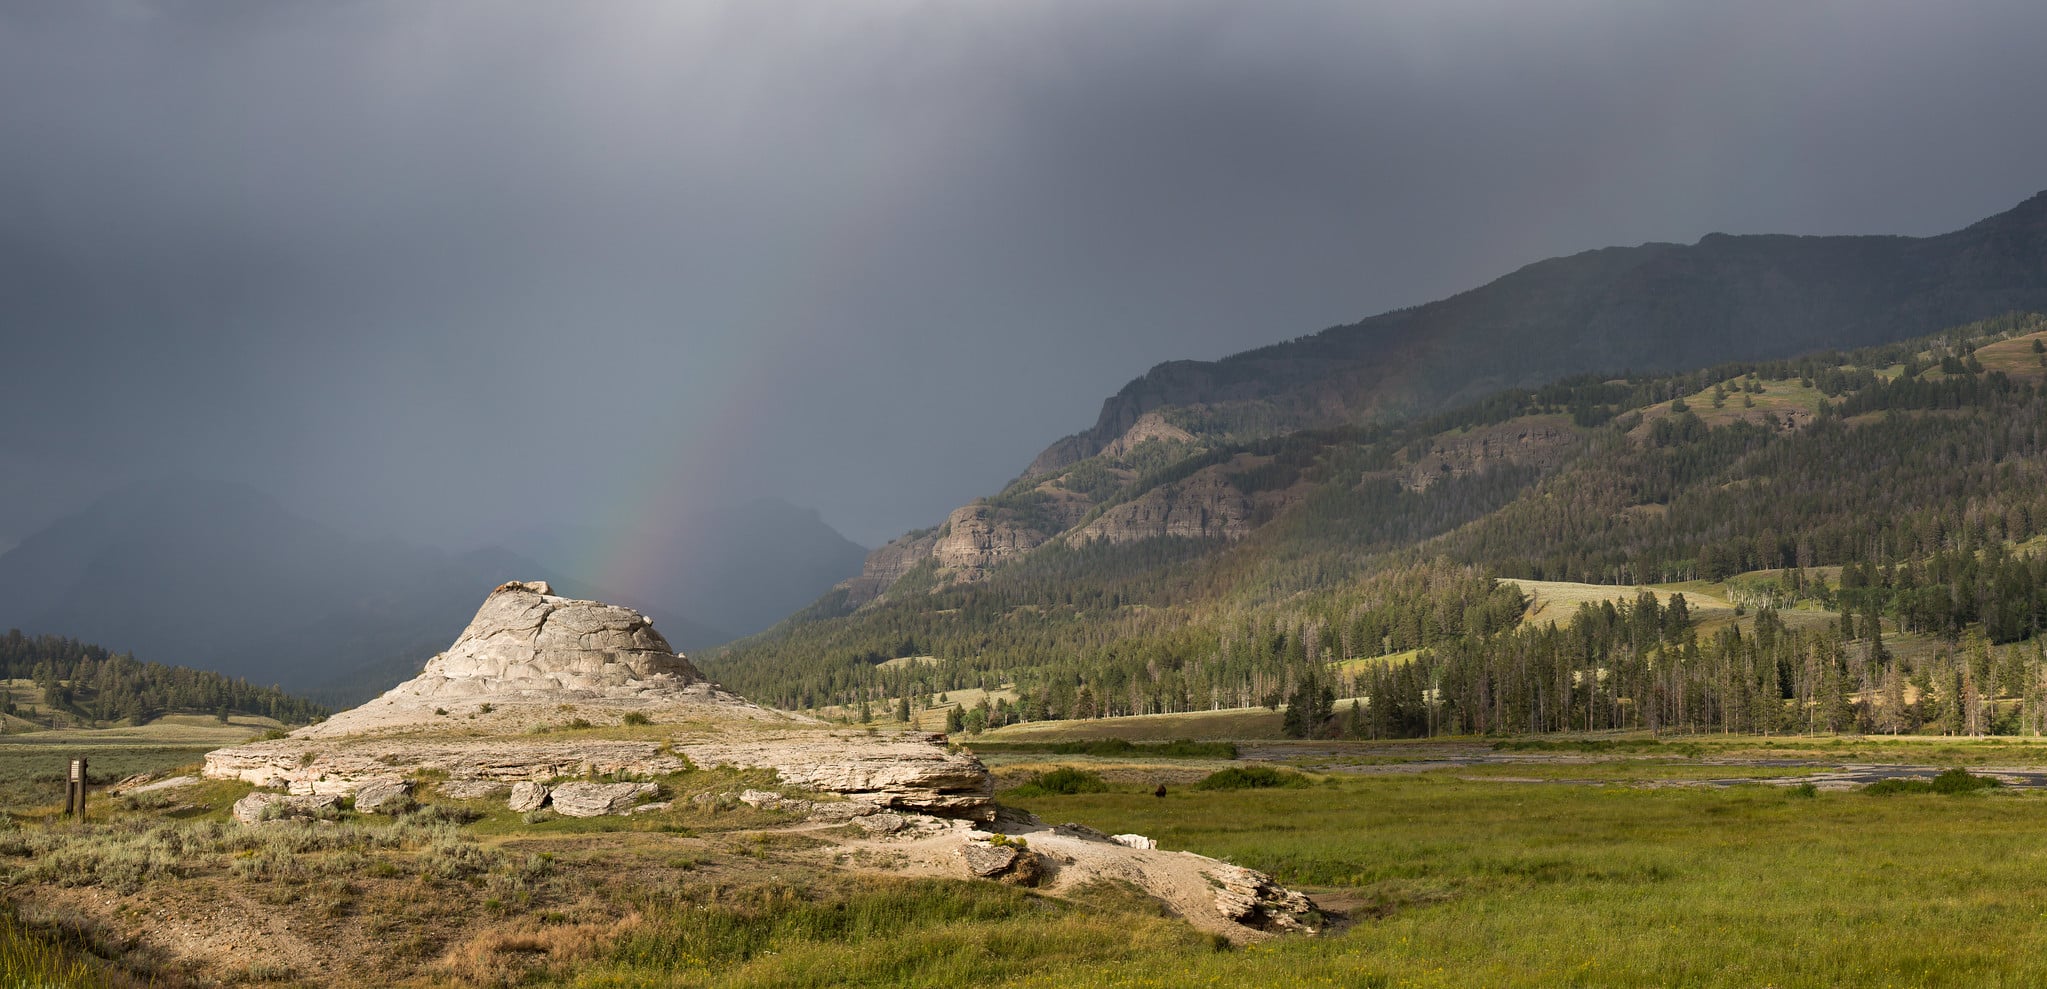 Soda Butte Creek Drainage: A hot spring terrace is in the foreground and an open valley with mountains surrounding it is in the background. © Yellowstone National Park, Neal Herbert